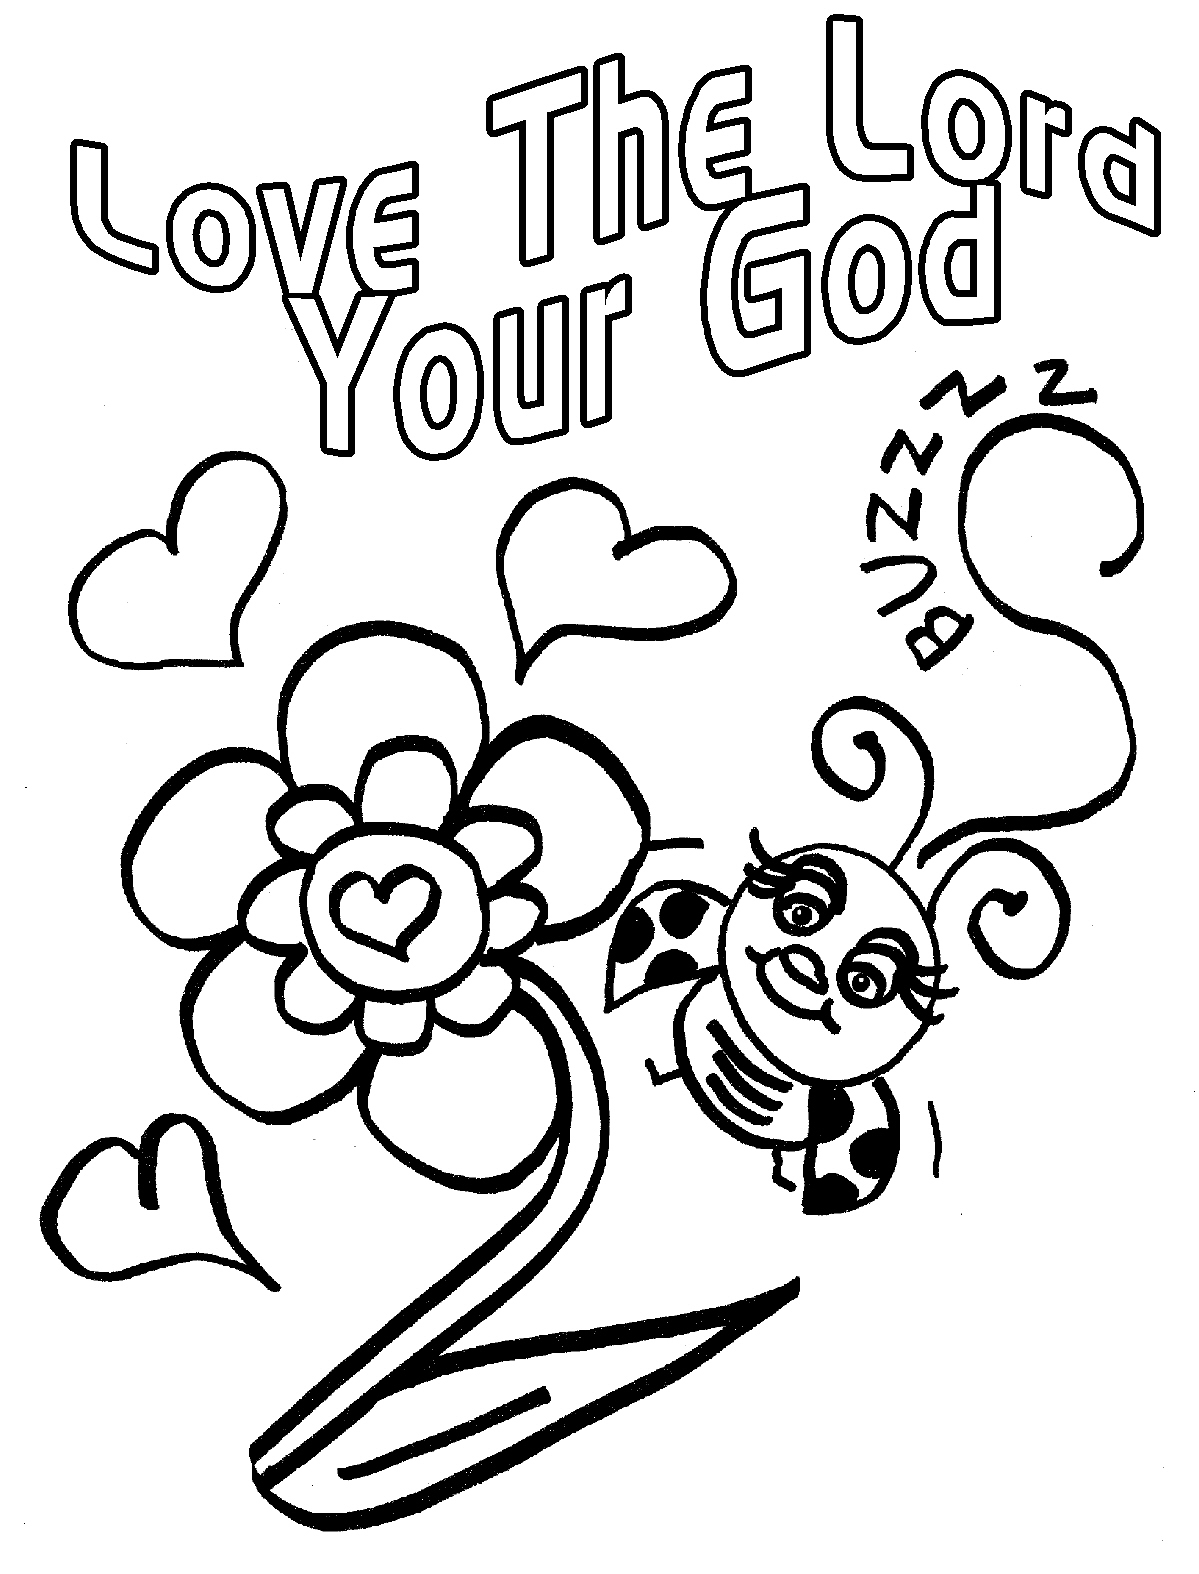 Coloring Page Jesus Loves You